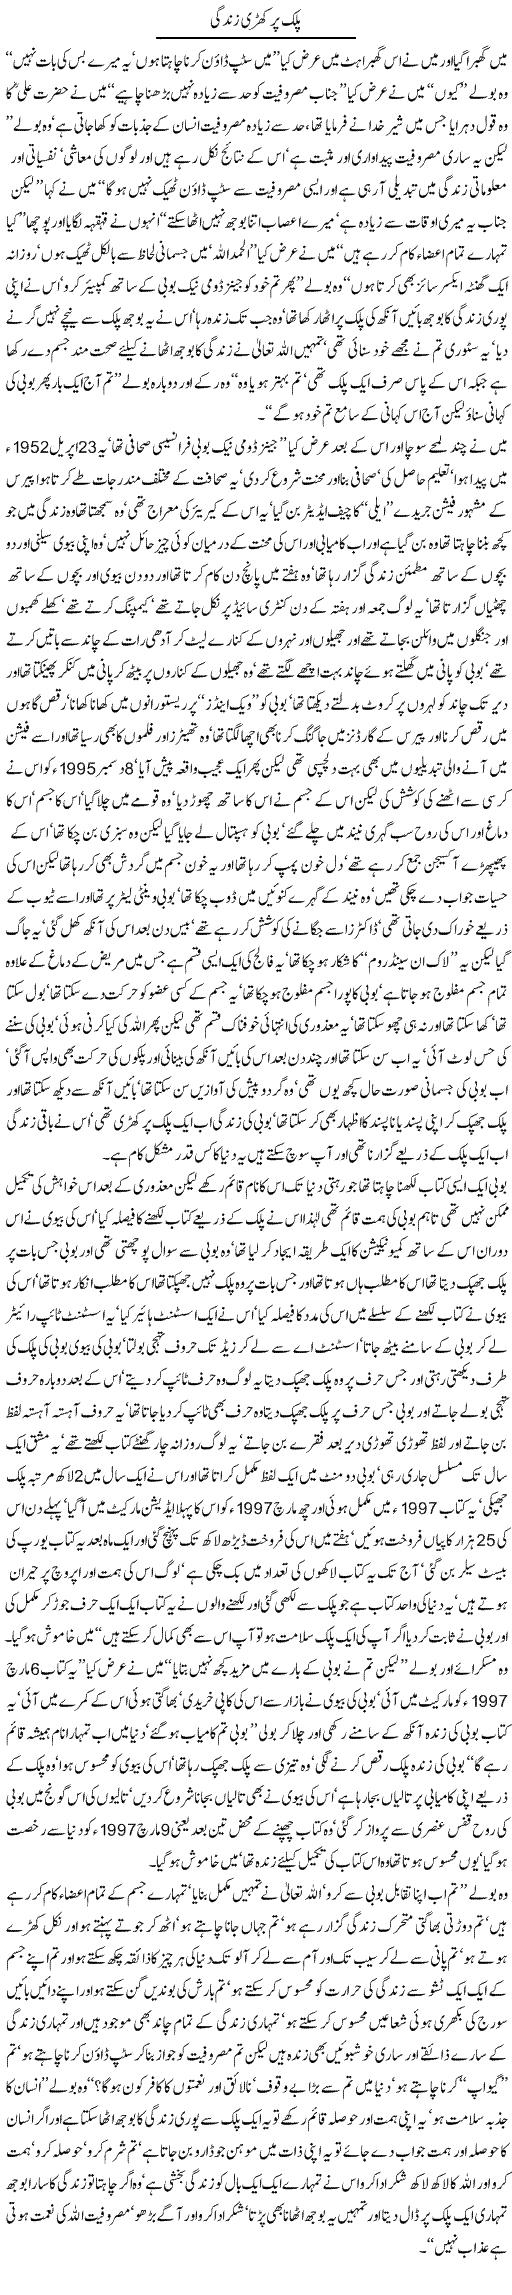 A Great Journalist Express Column Javed Chaudhry 11 September 2011